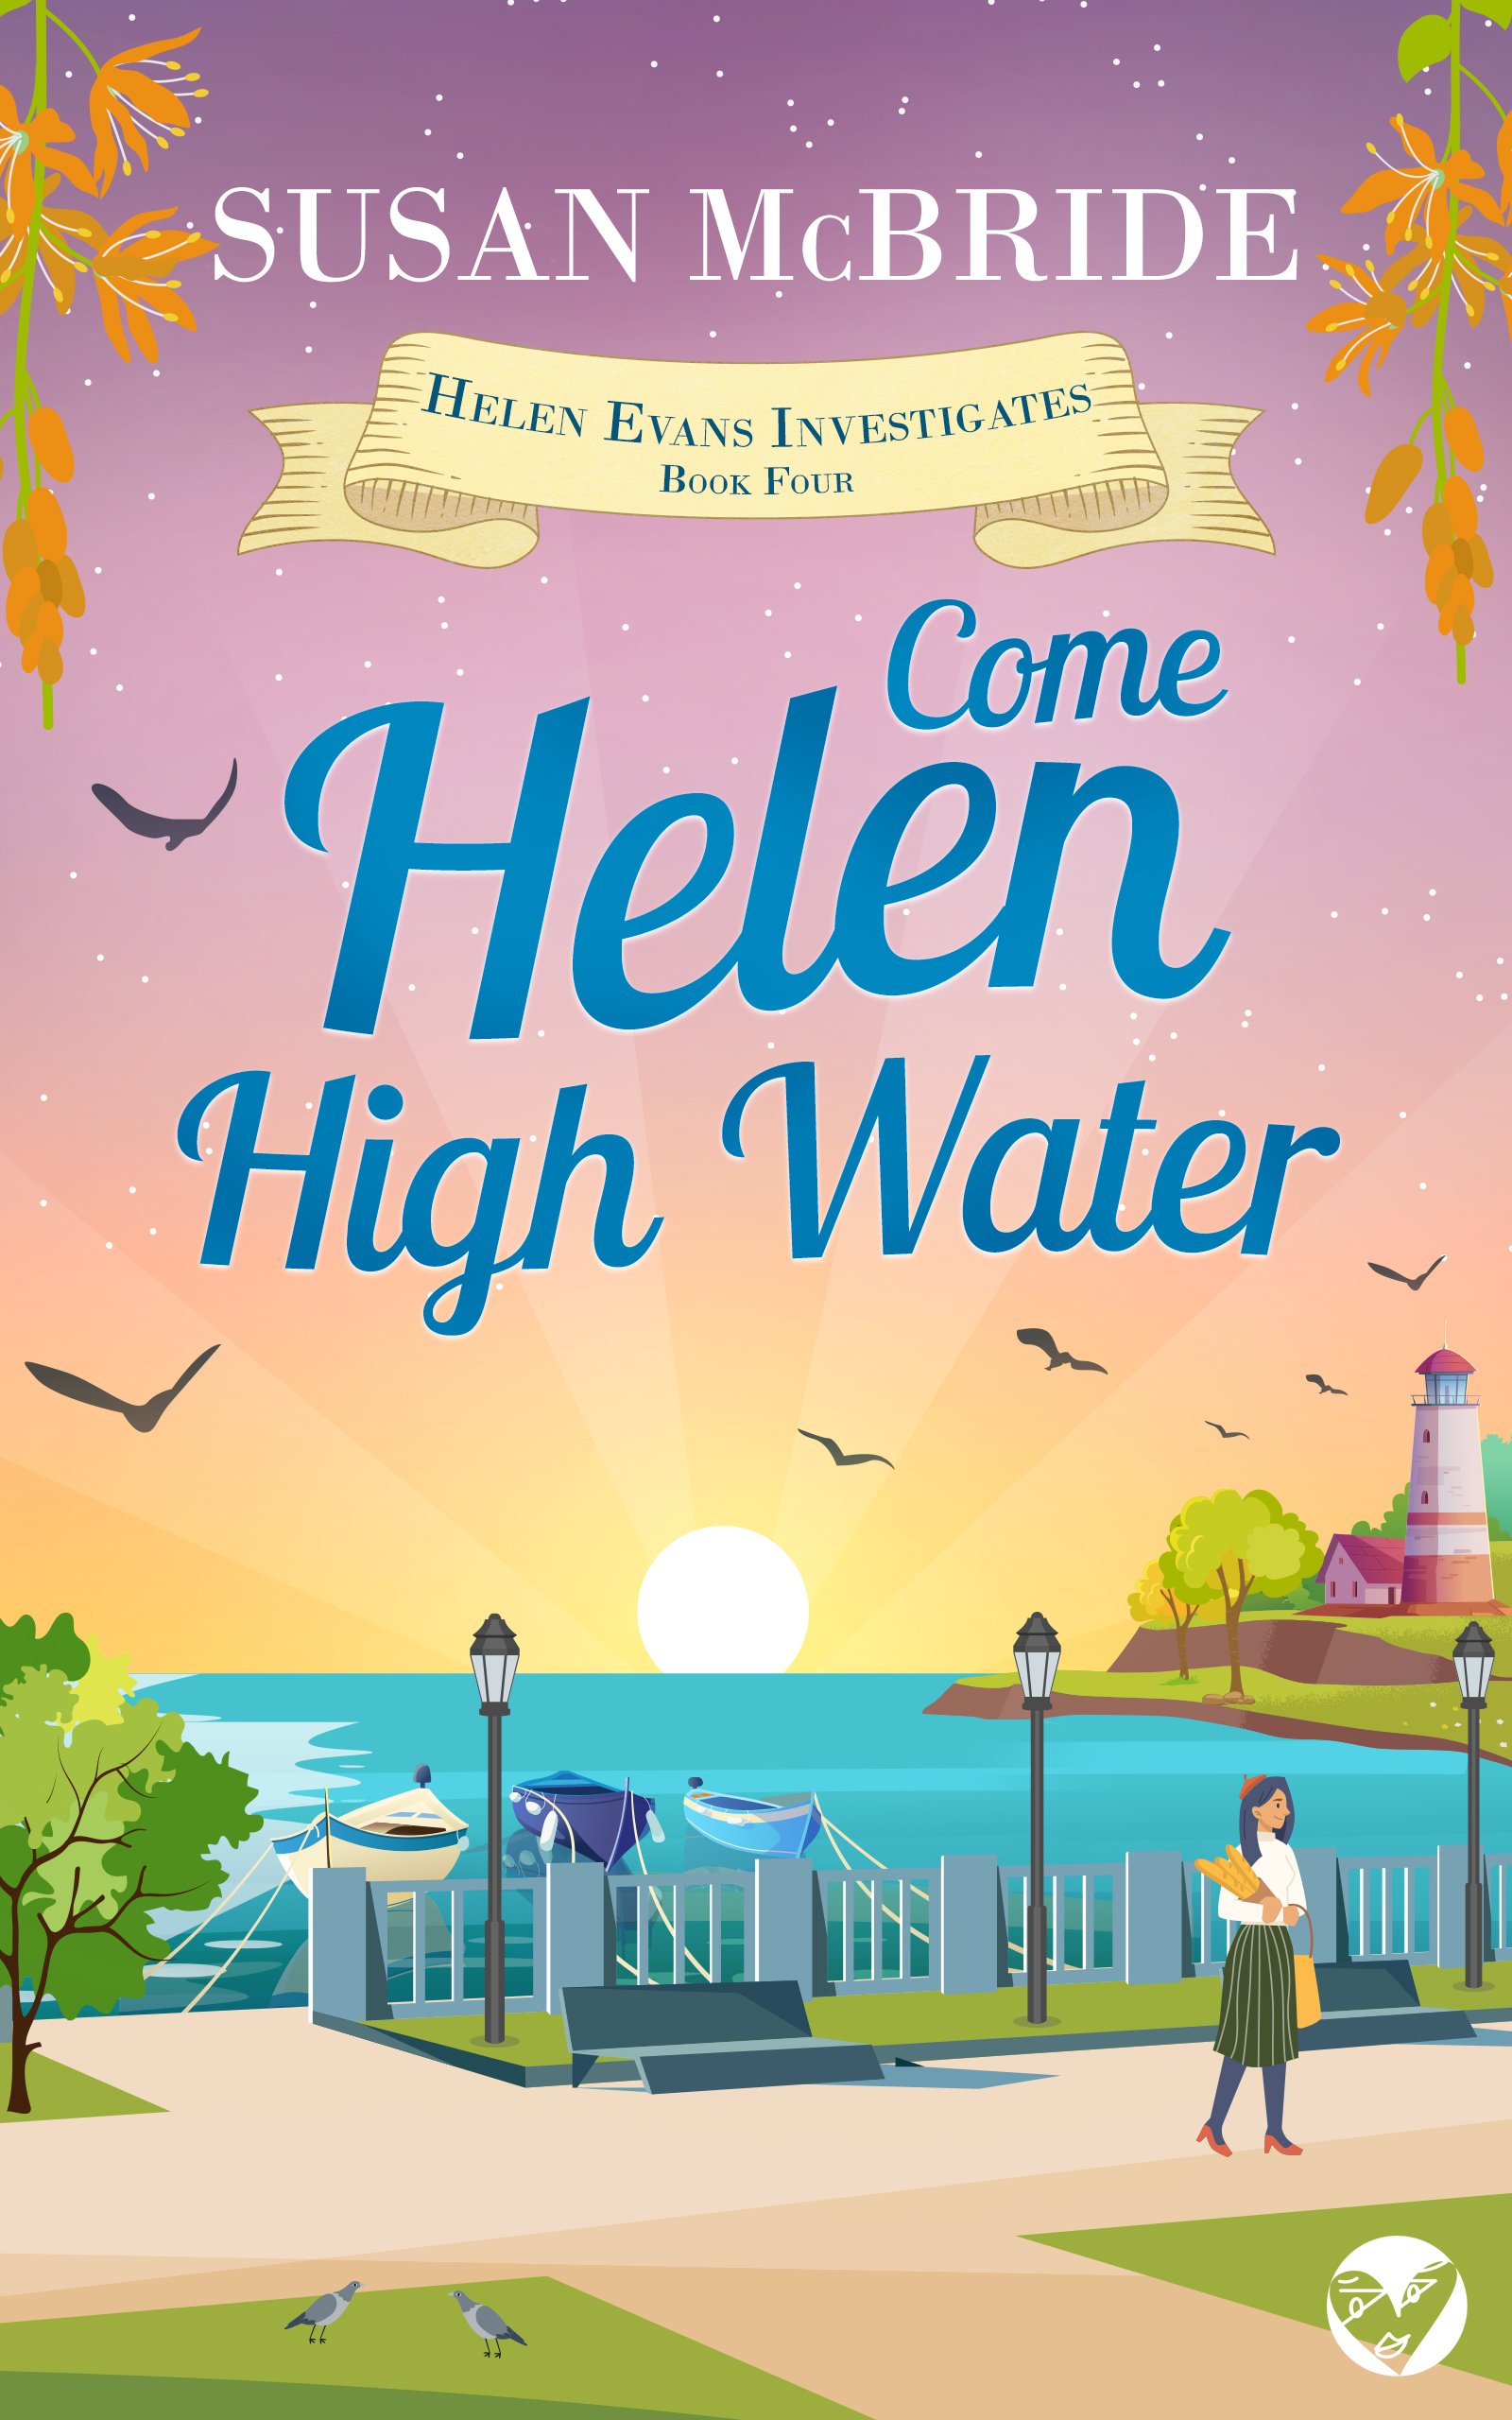 COME HELEN HIGH WATER cover publish.jpg